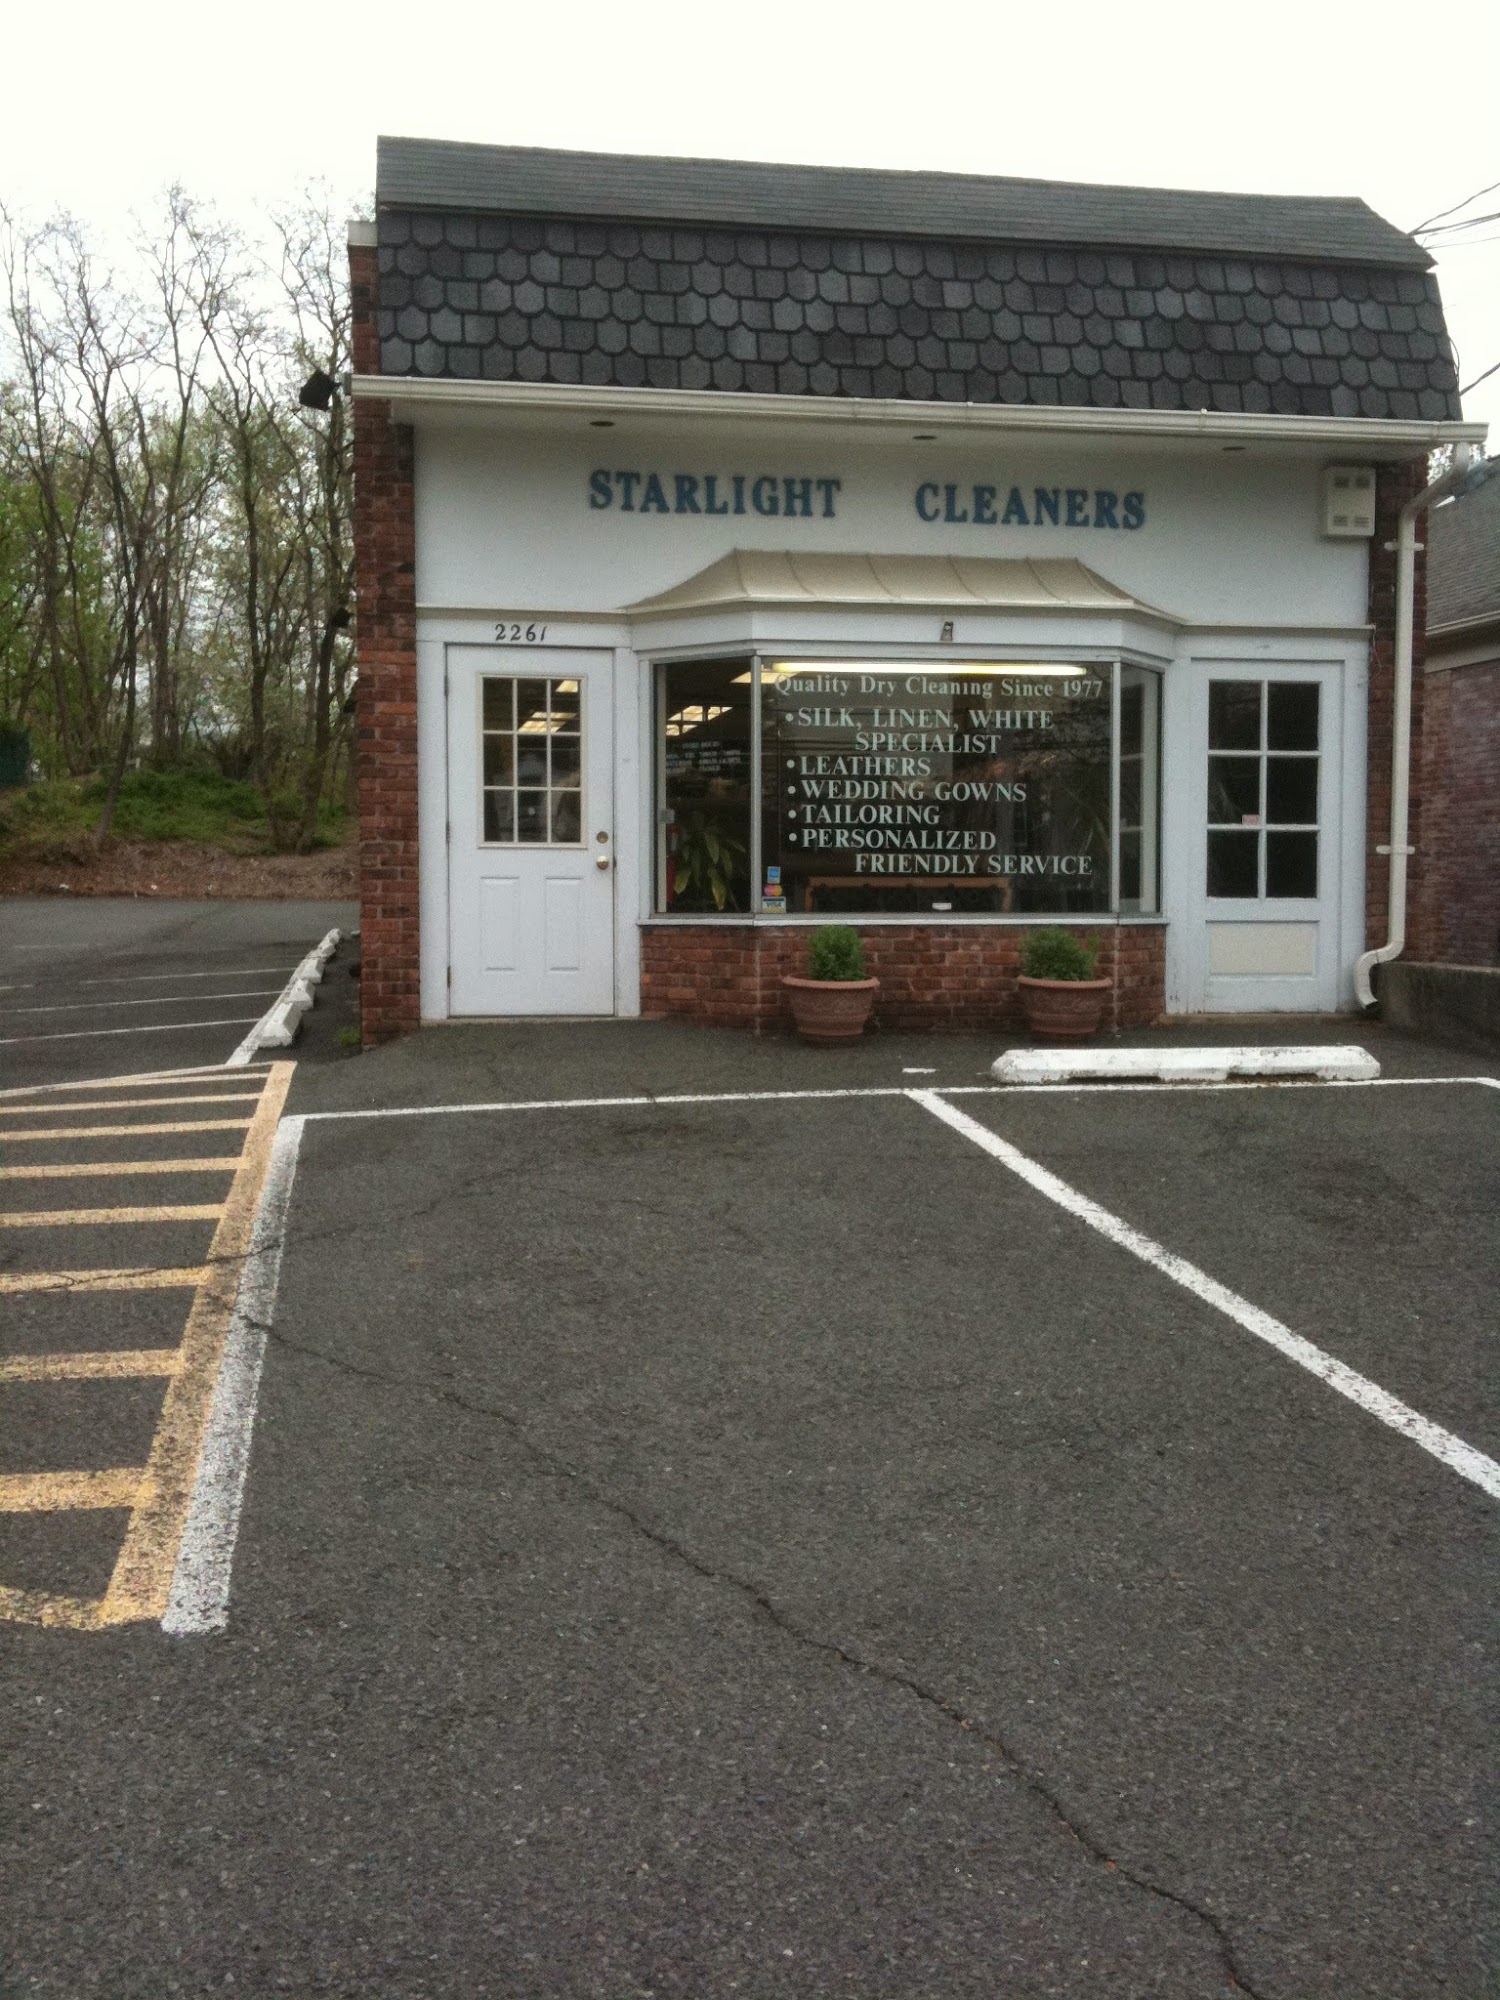 Starlight Cleaners